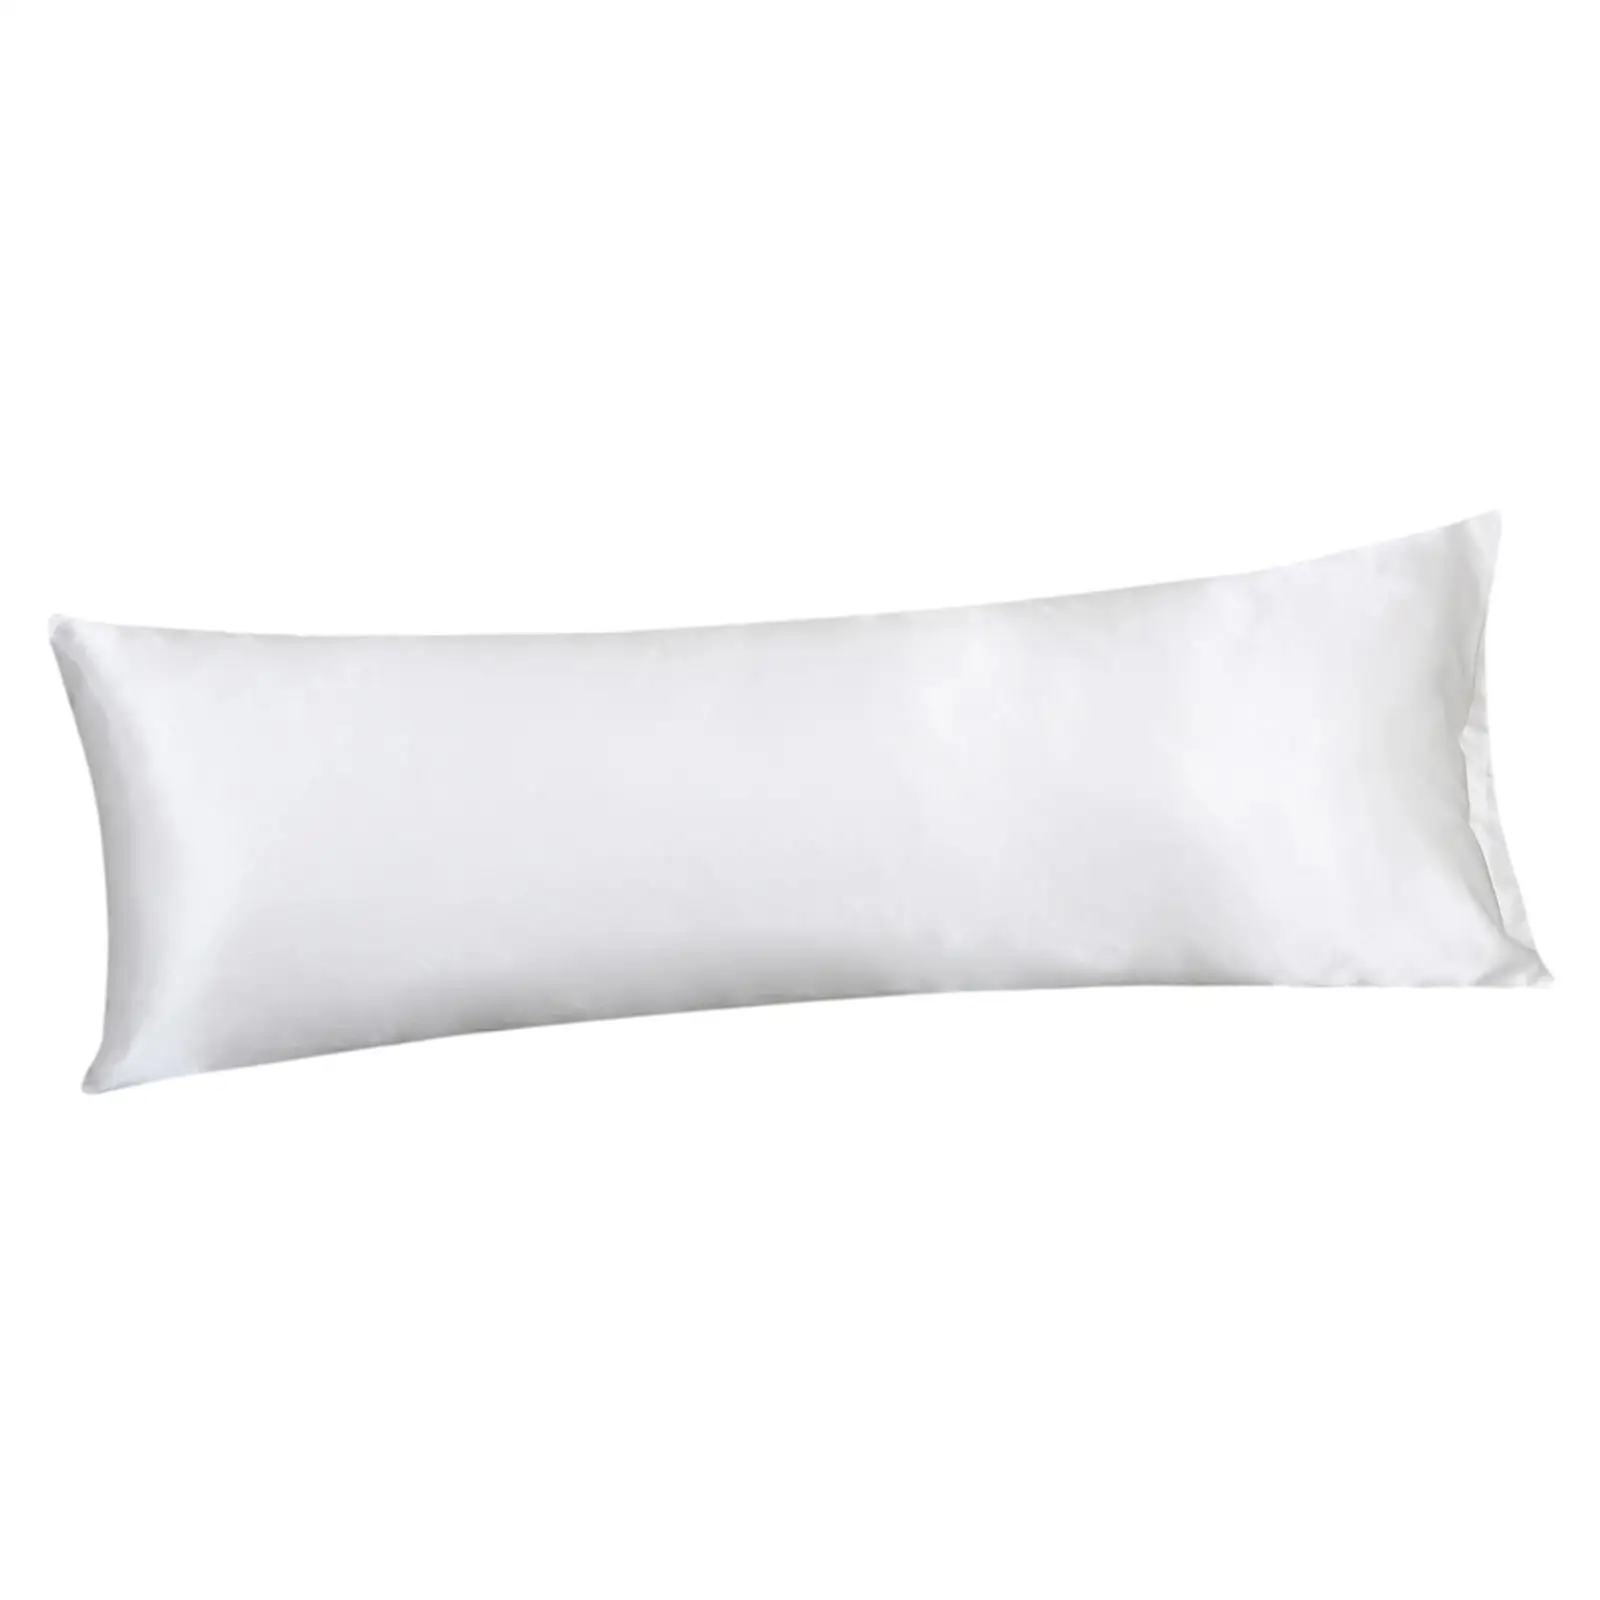 Long Pillowcase Pillow Protector Case Breathable for Skin Relaxing Bedroom